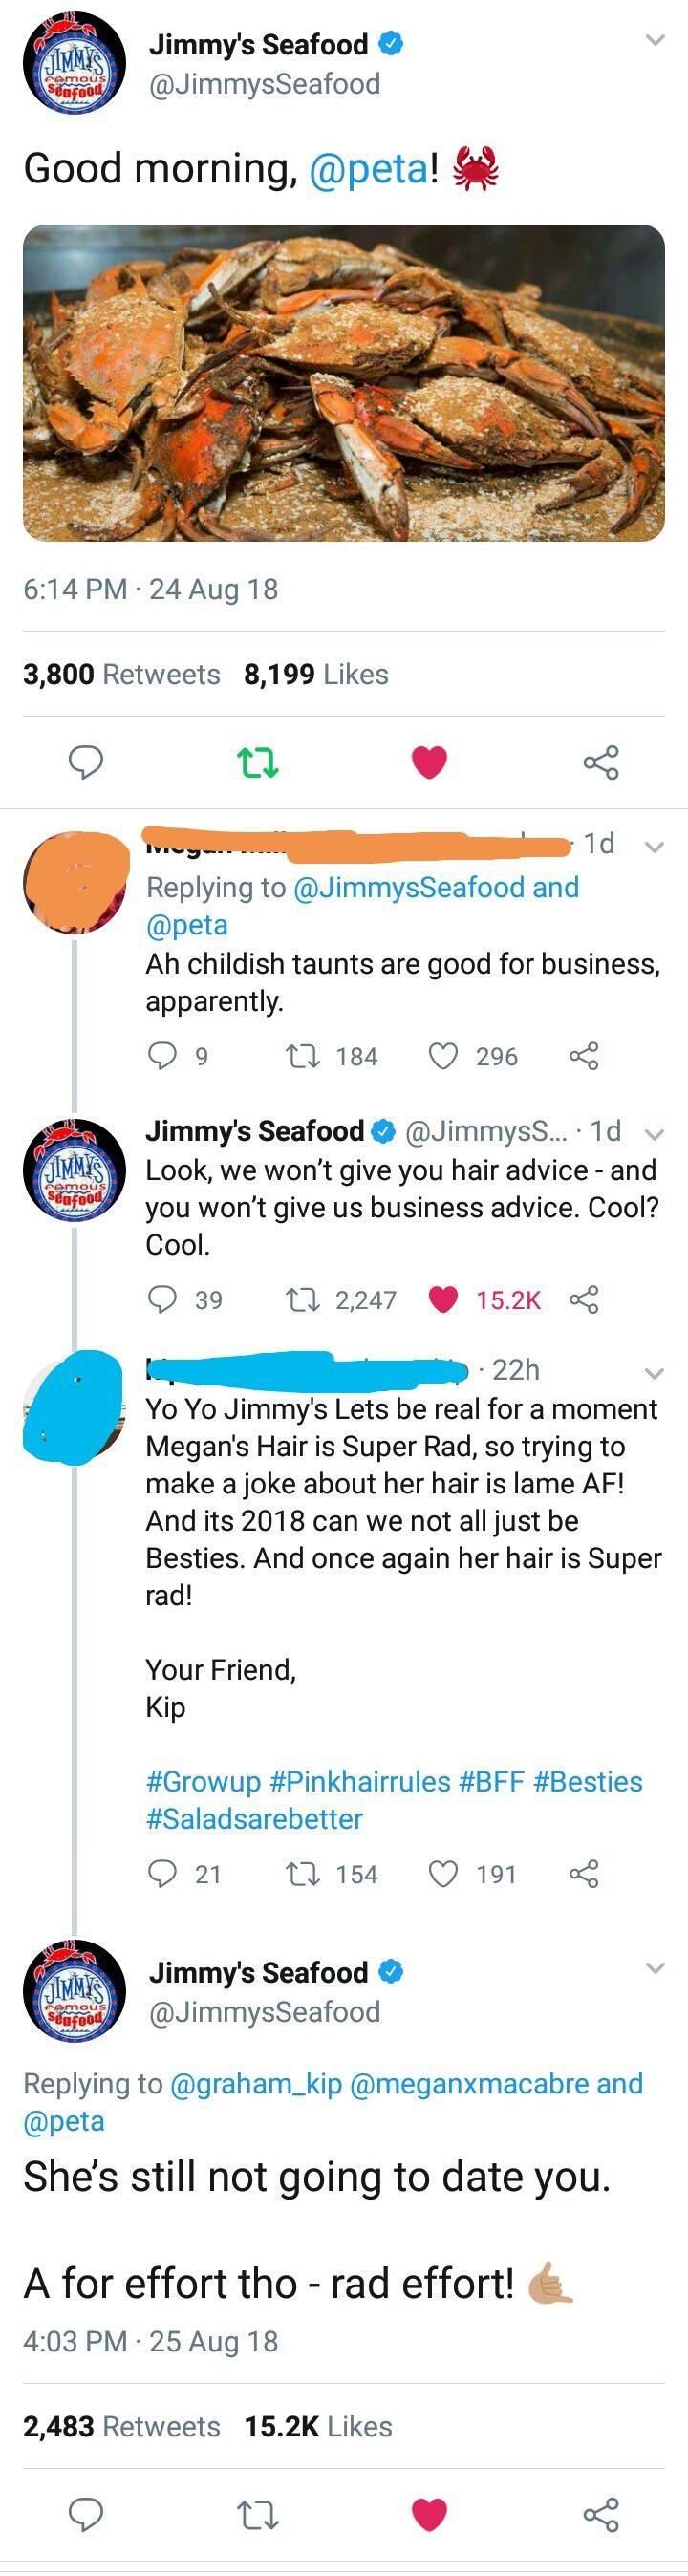 Jimmy’s Seafood has quite possibly the most savage twitter out there